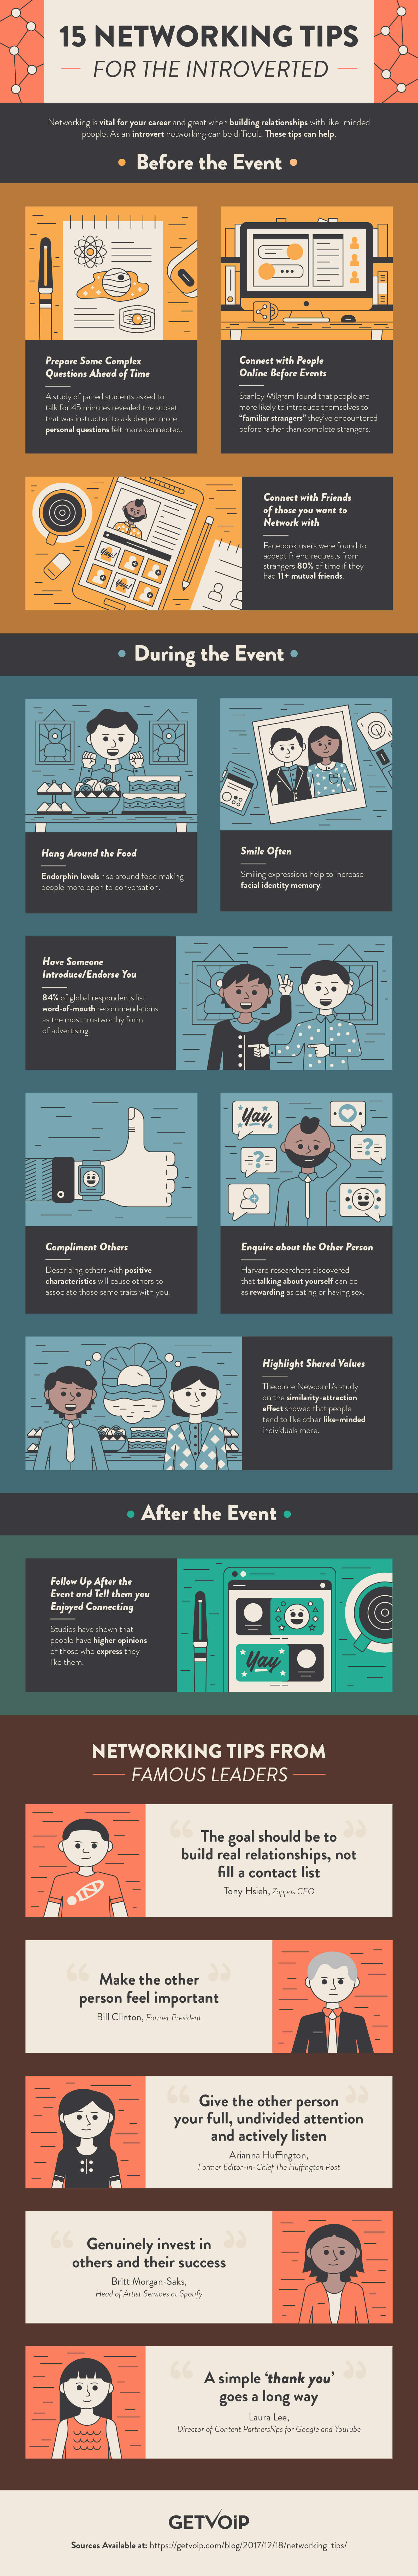 The Introvert’s Guide to Networking: 15 Valuable Tips - Infographic